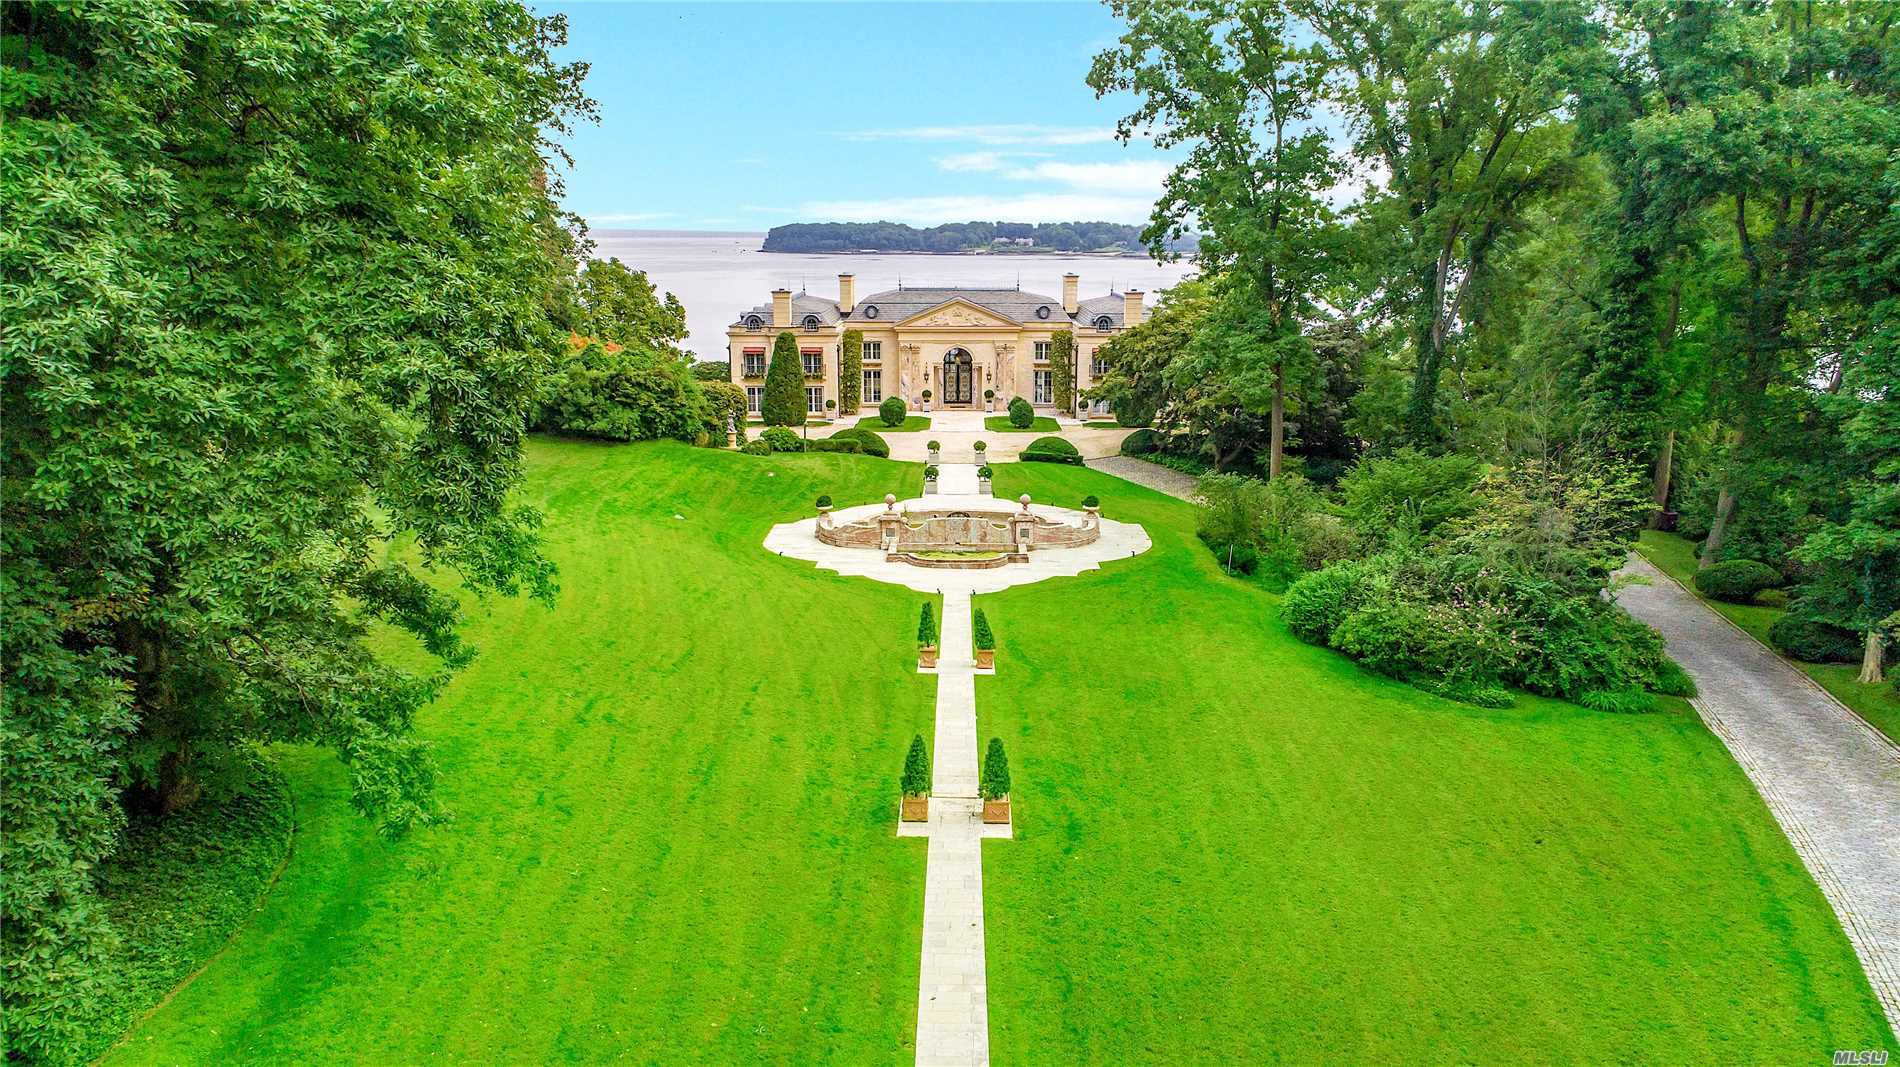 A Kings Point mansion mixing Versailles-style architecture and modern living is on the market for $50 million. (Photo courtesy of Daniel Gale Sotheby's International Realty)